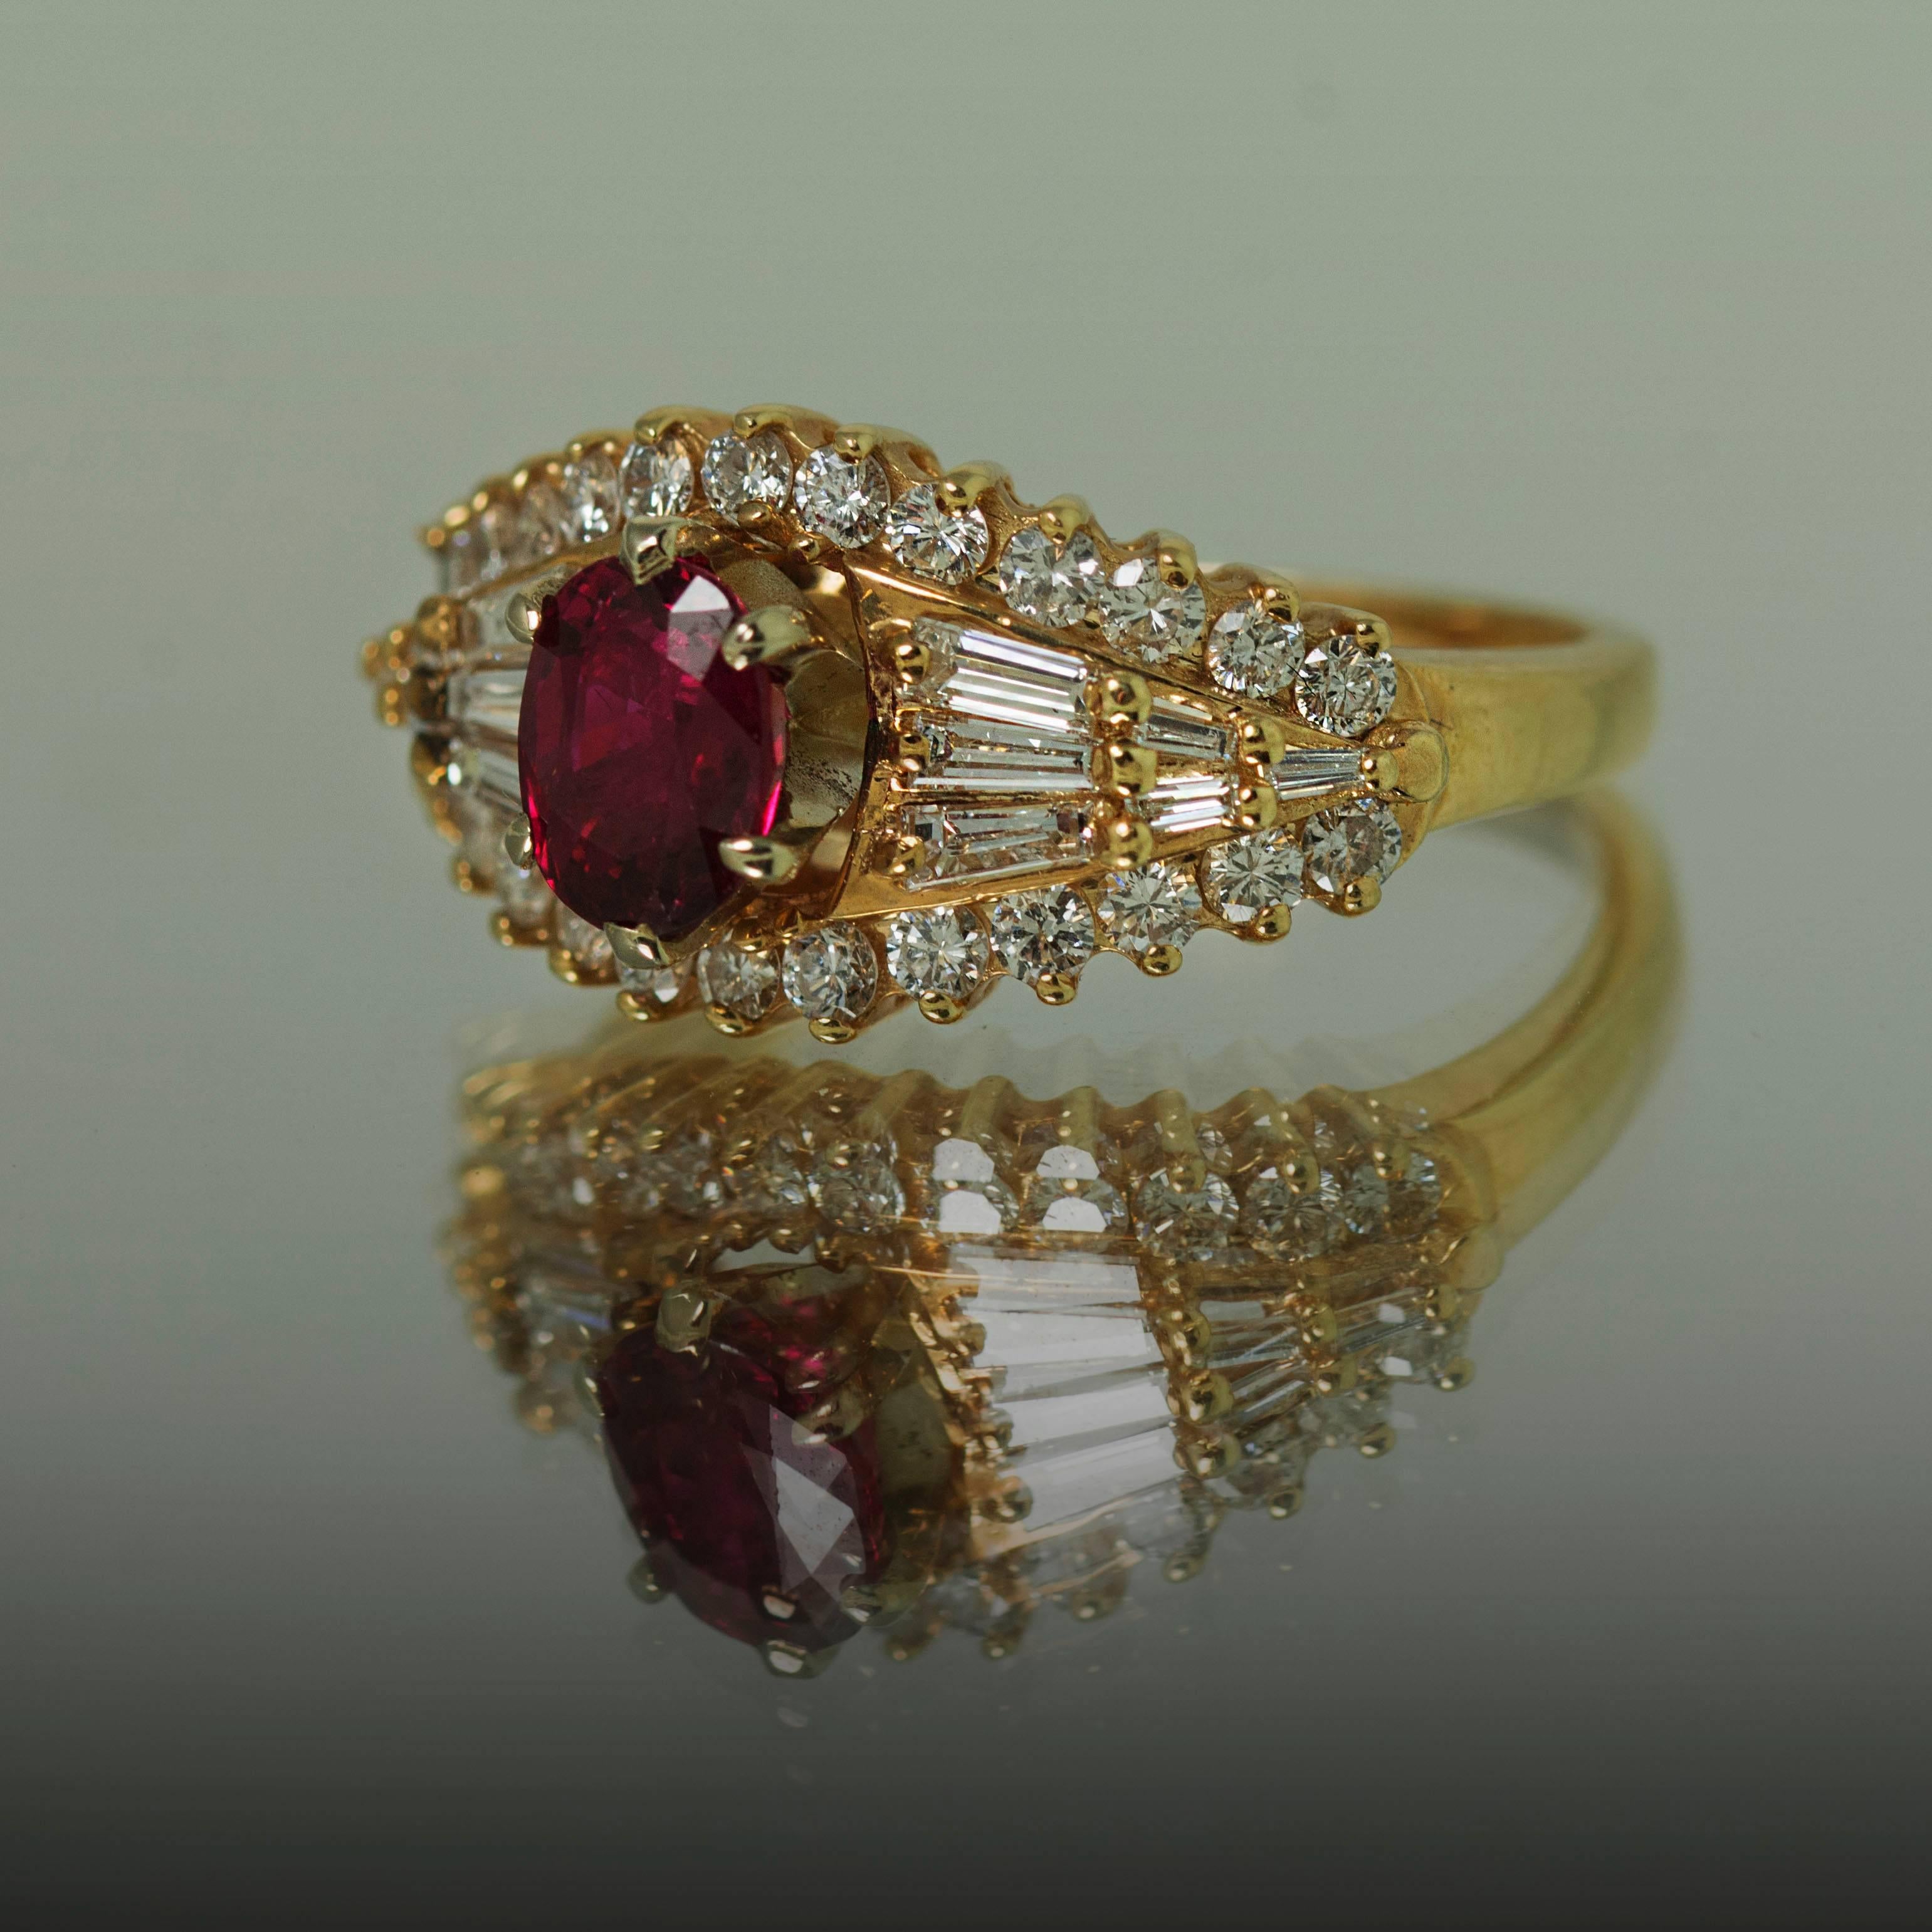 14K Yellow Gold Ring with 1 Oval Burma Ruby Weighing 1.07 Carats and 26 Round Diamonds Weighing 0.78 Carats and 12 baguette Diamonds Weighing 0.46 Carats.